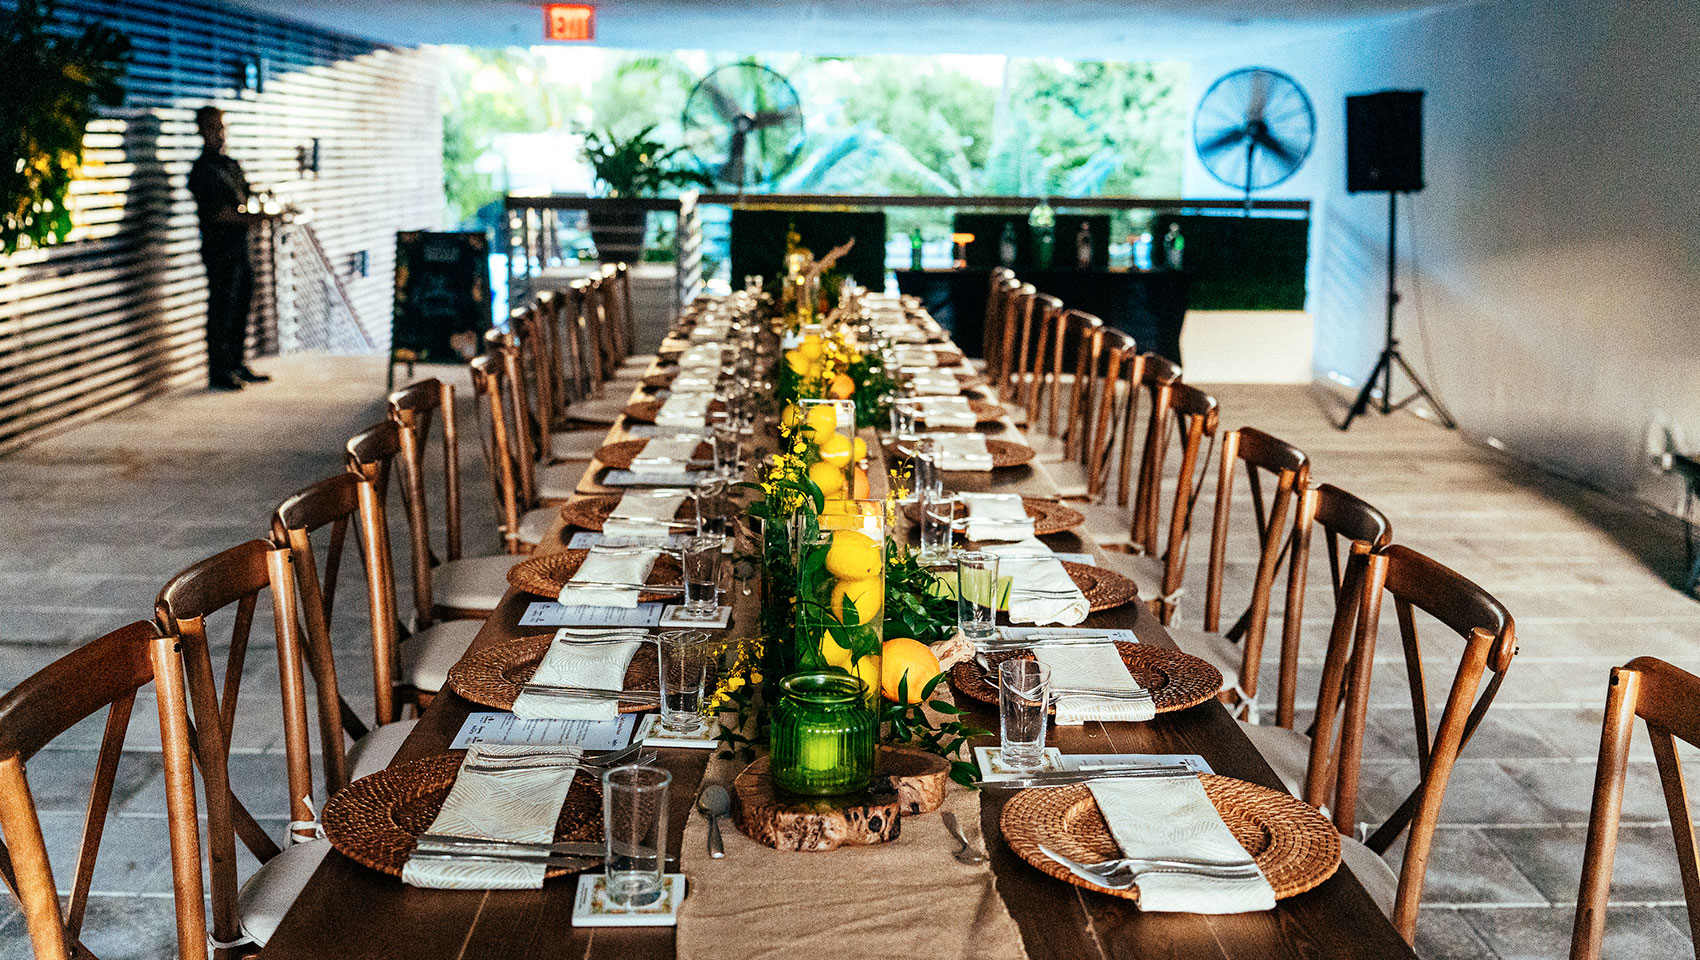 kimpton anglers breezeway with a long table with plates and glasses set for a social event